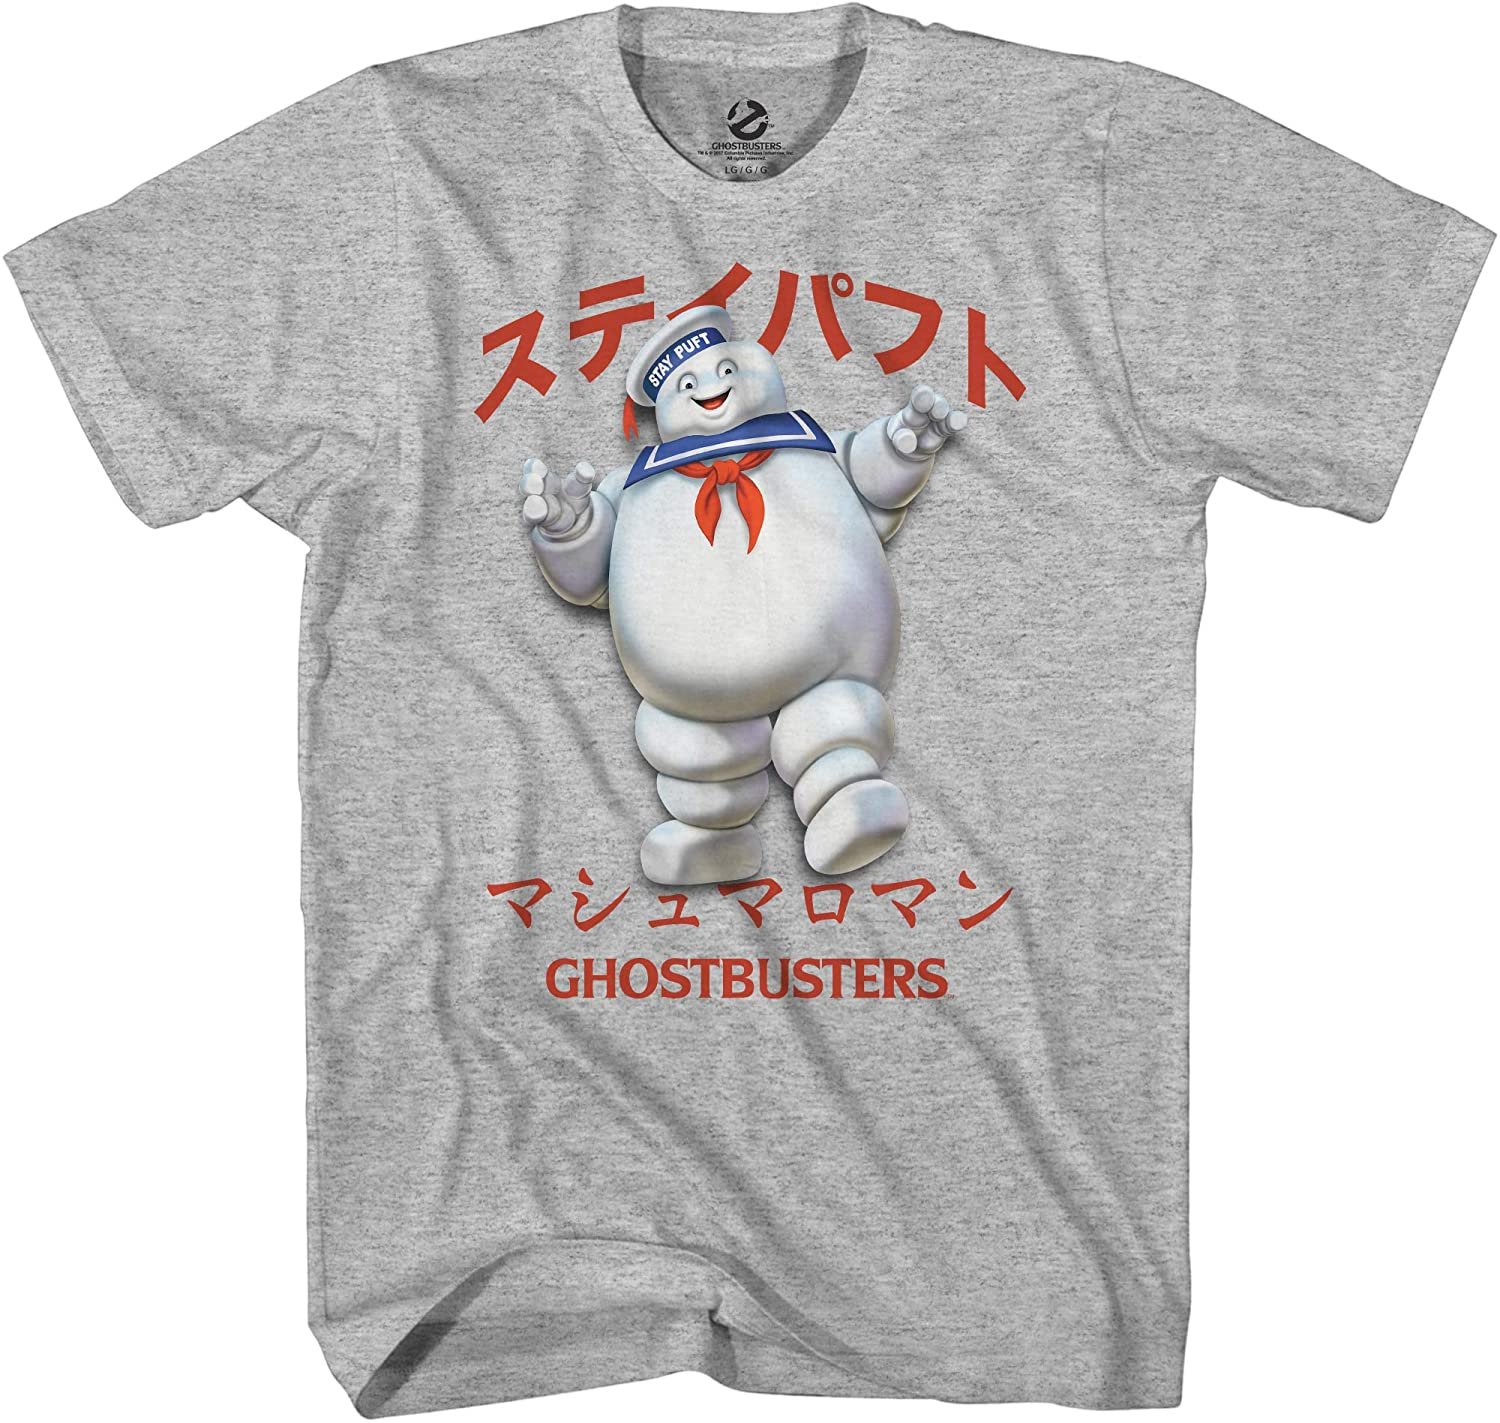 Ghostbusters Anime Mens Ghostbusters Short Sleeve T-Shirt - Sizes S-3XL